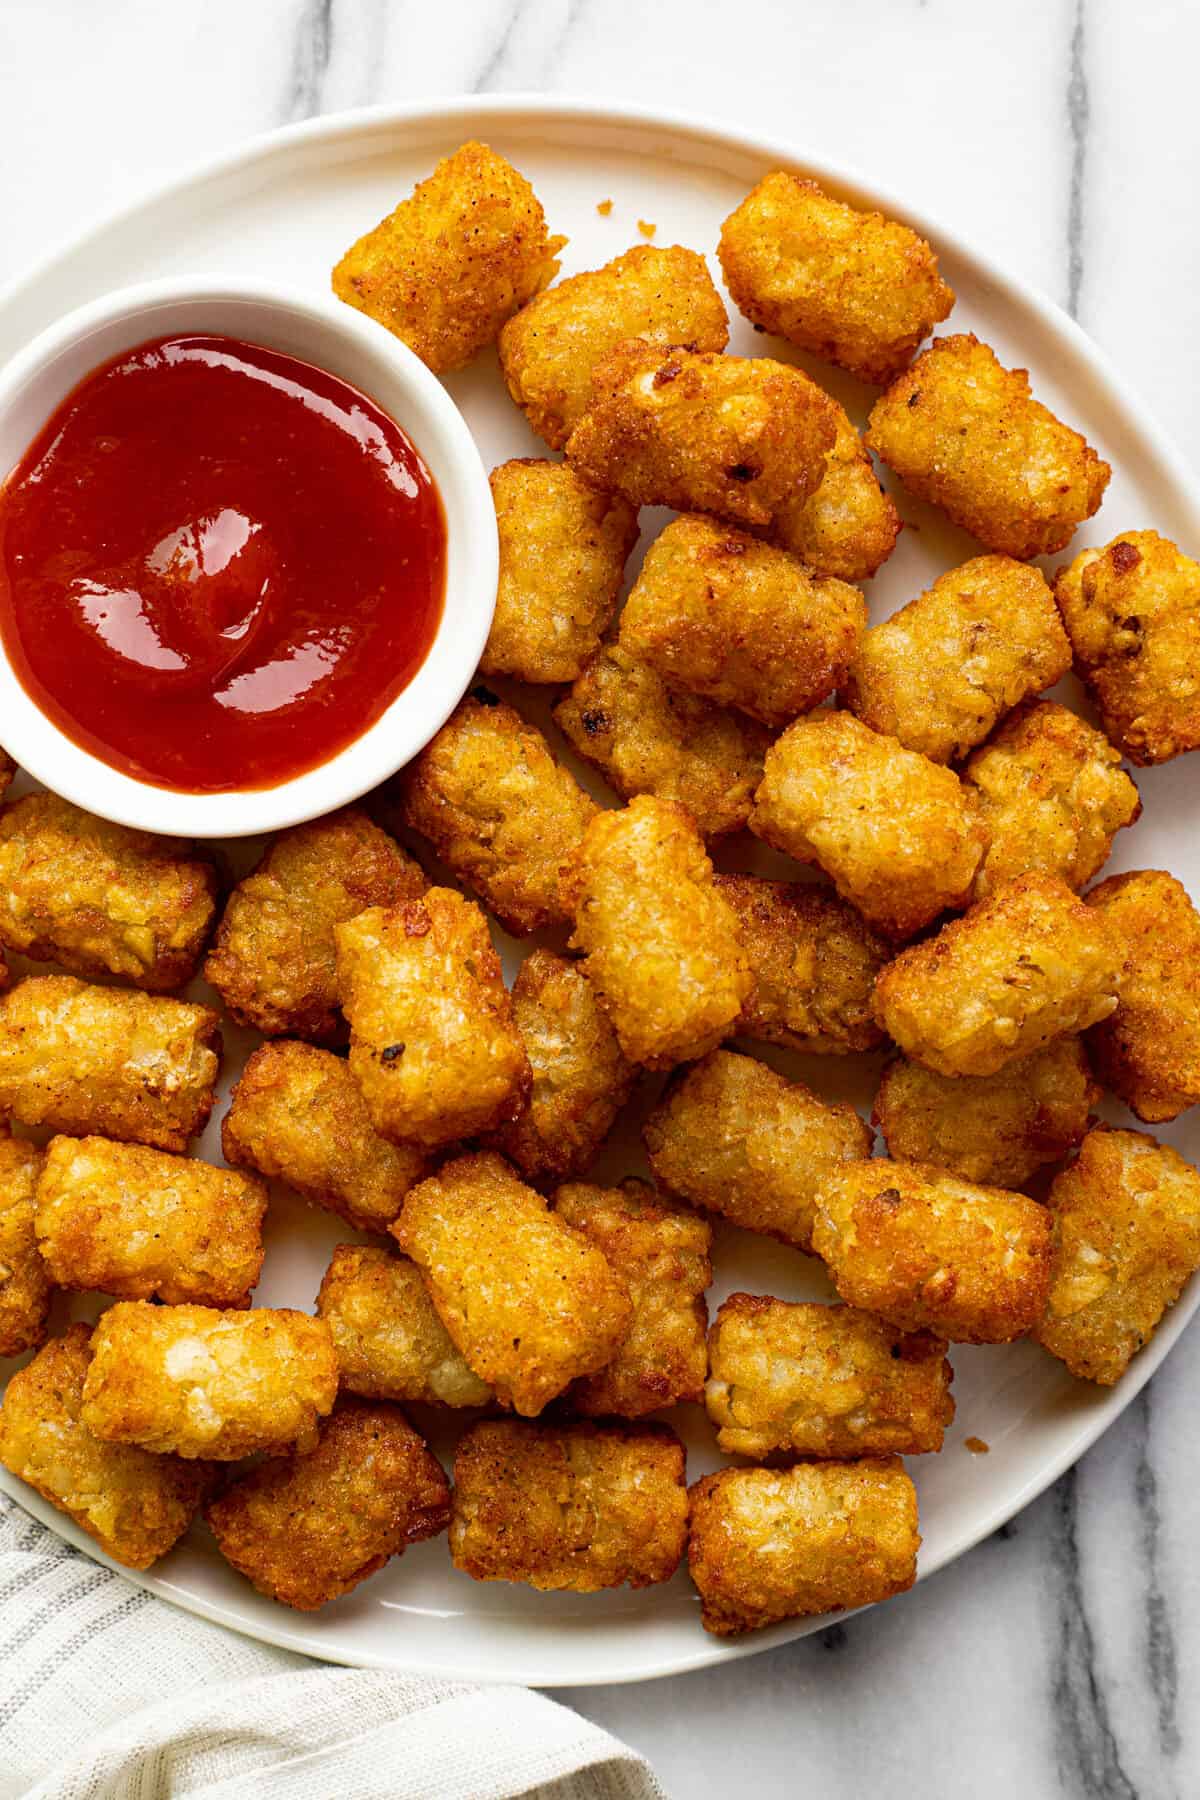 White plate filled with crispy tater tots and a small dish of ketchup.